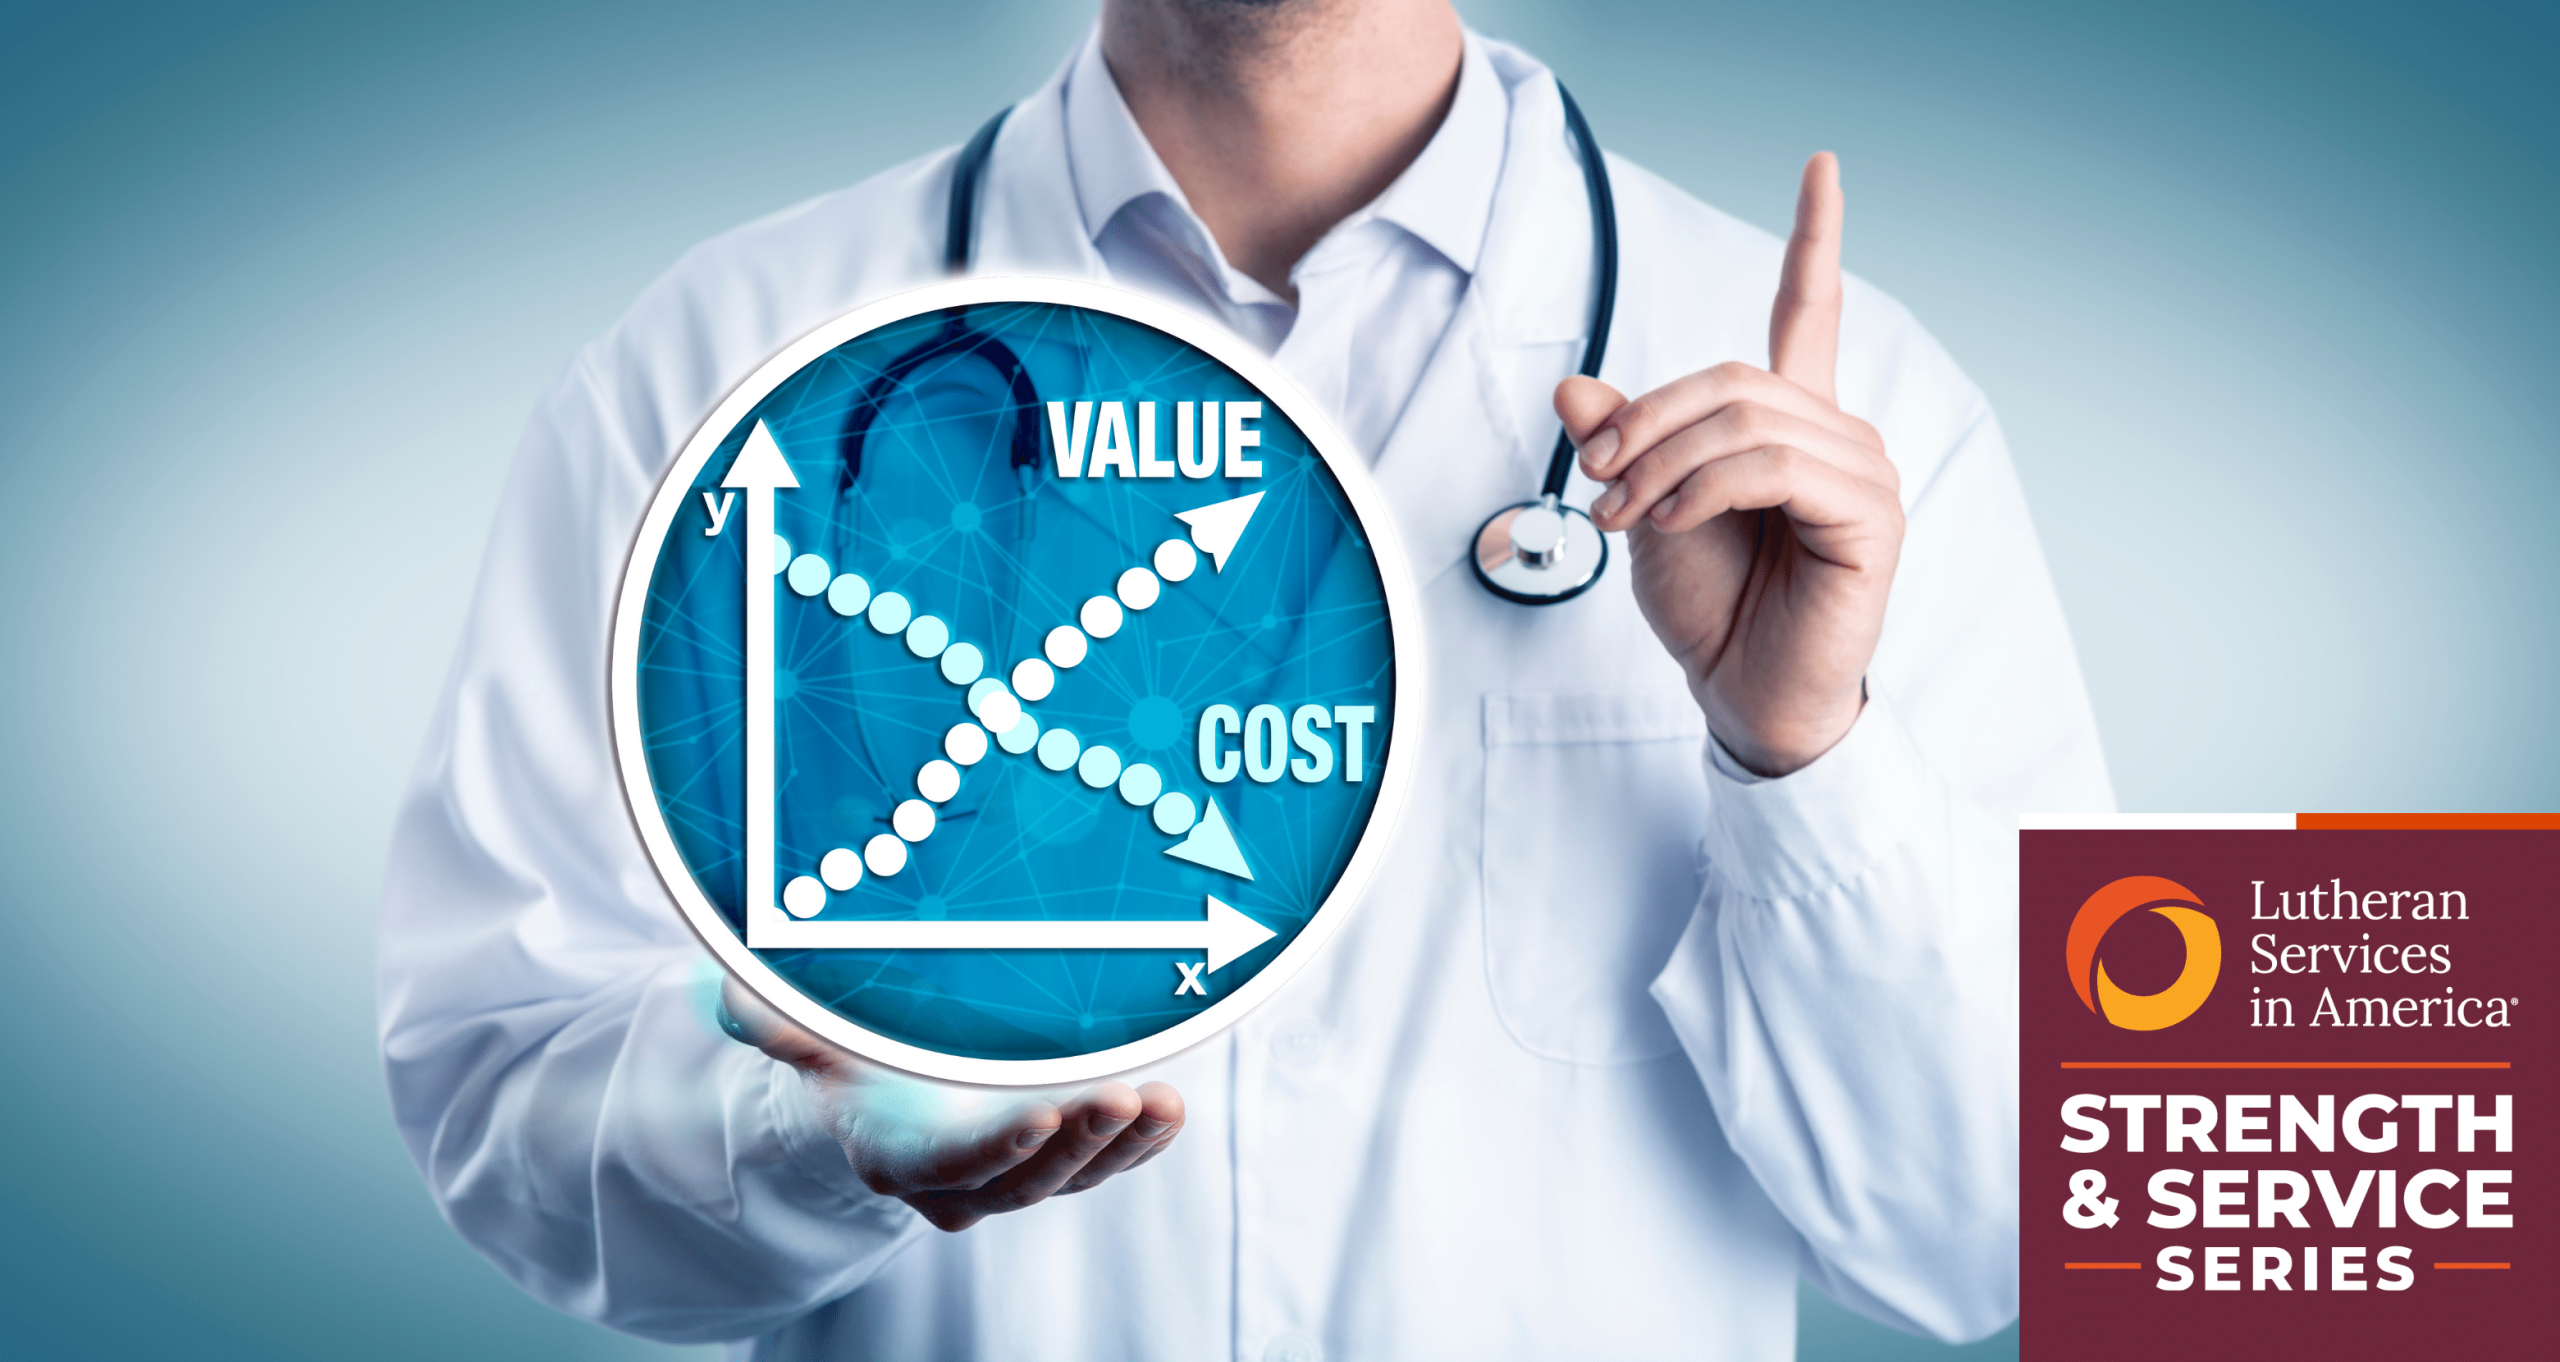 Transforming Older Adult Health Through Value-based Care, in Partnership with Serviam